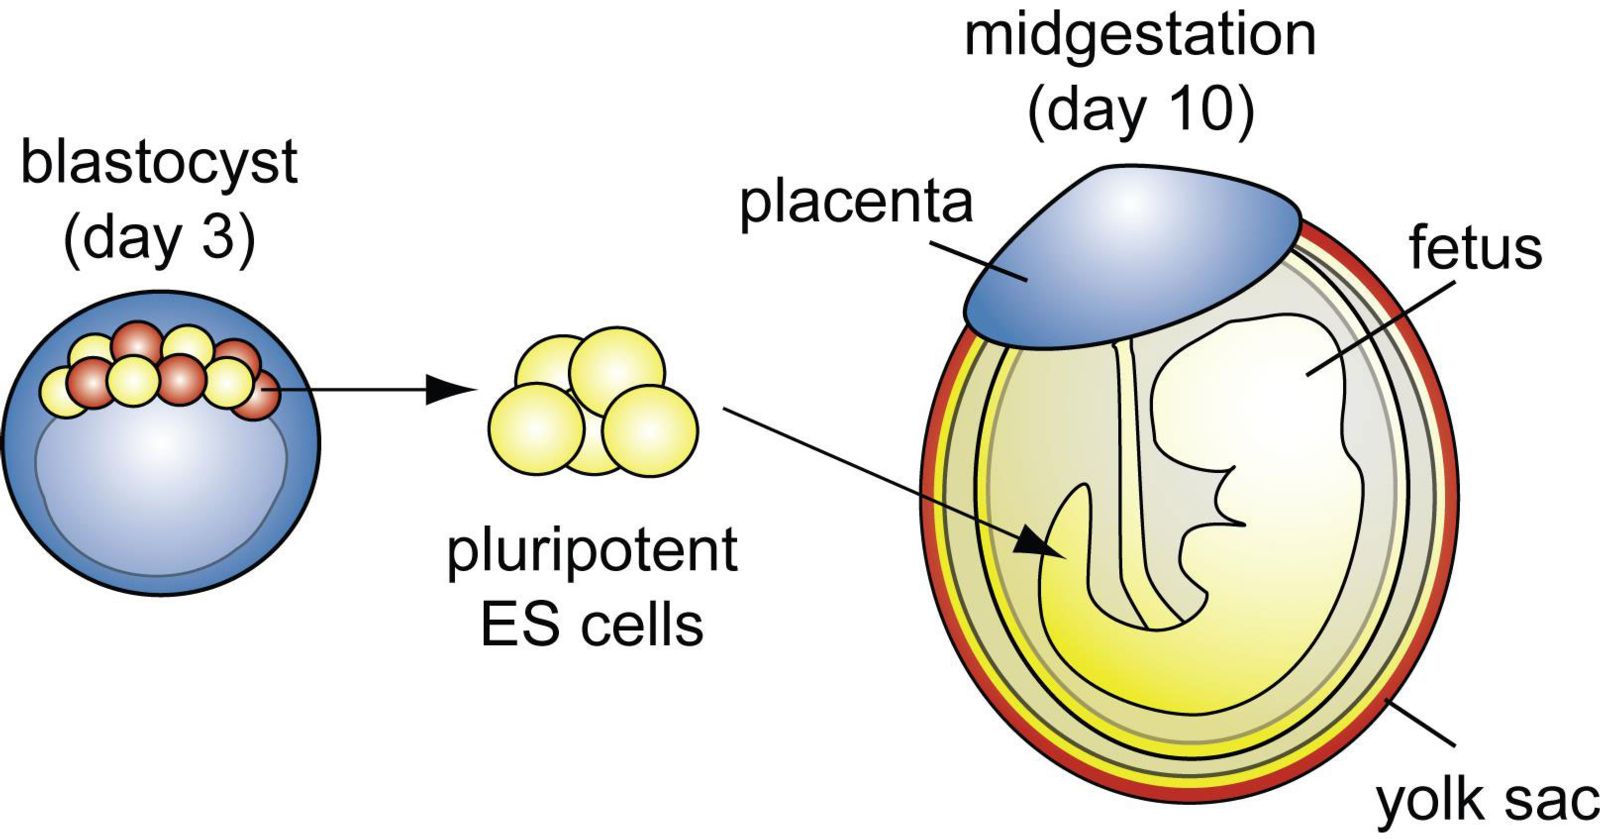 The origins of stem cells during mouse development.